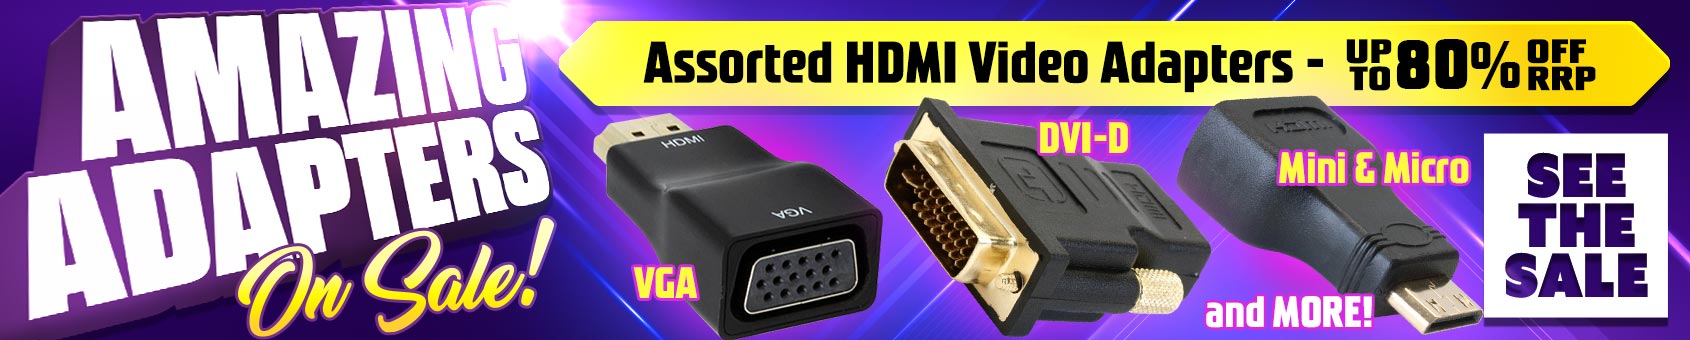 Our BIGGEST SALE EVER on Analogue DVI & VGA to HDMI Adapters during April!!!